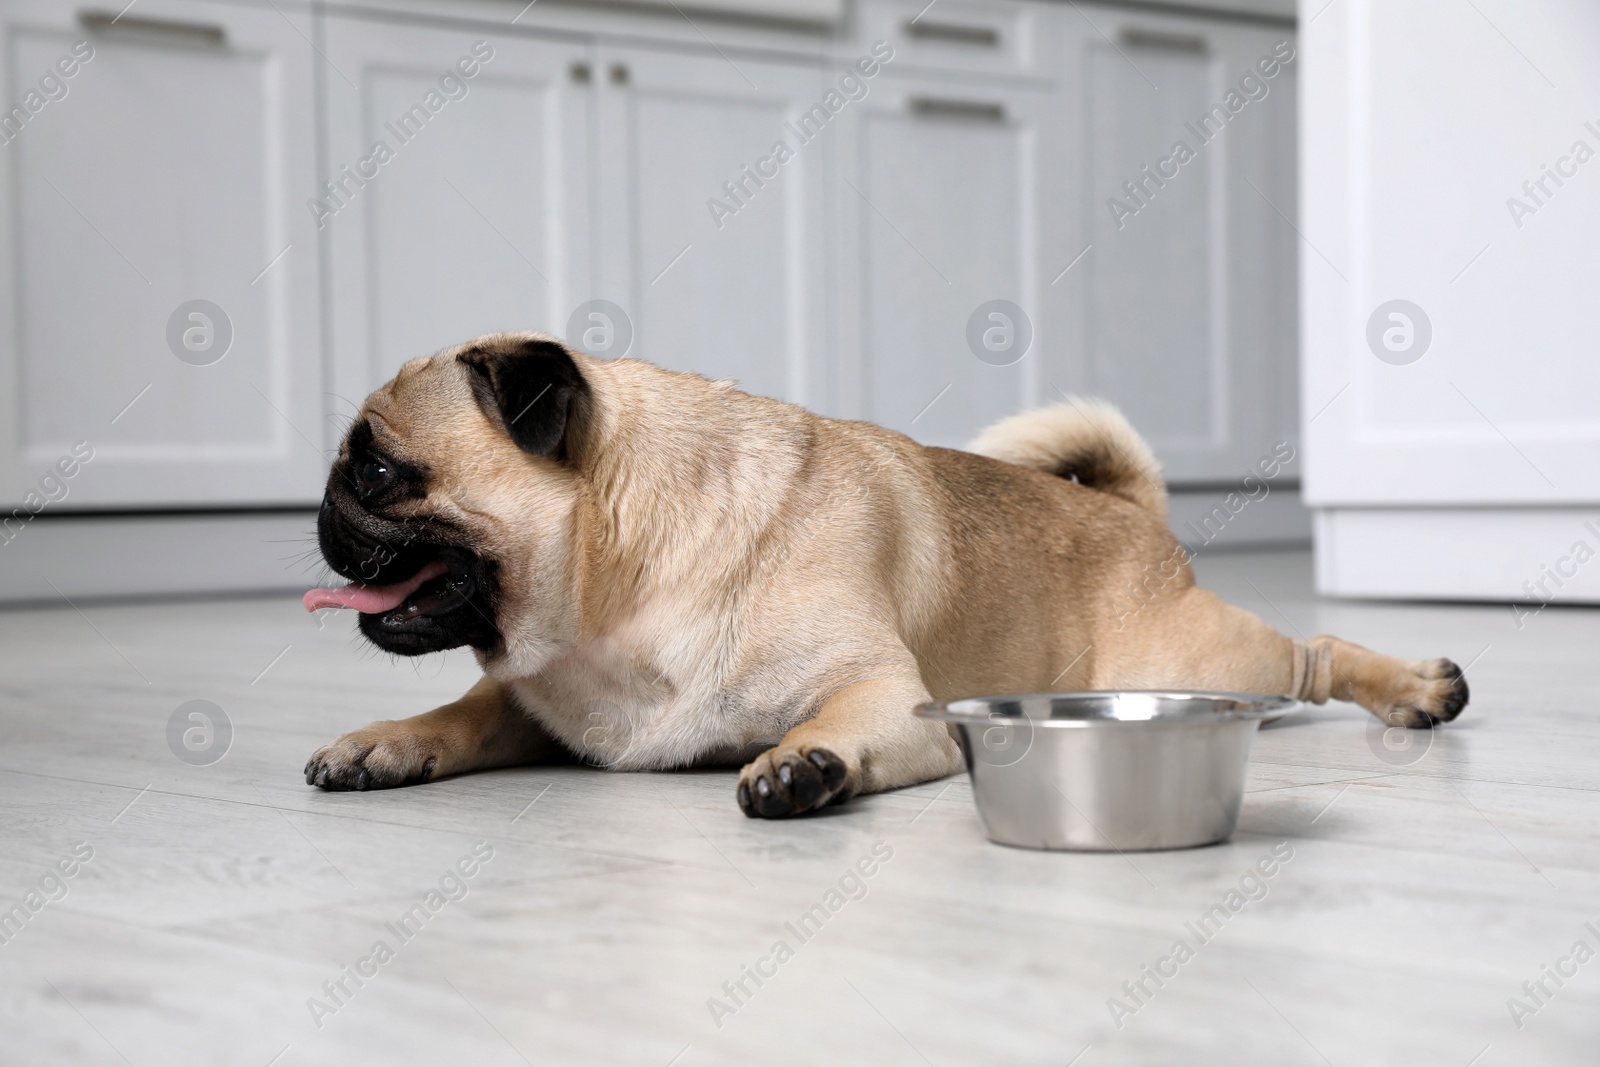 Photo of Cute pug dog suffering from heat stroke near bowl of water on floor at home